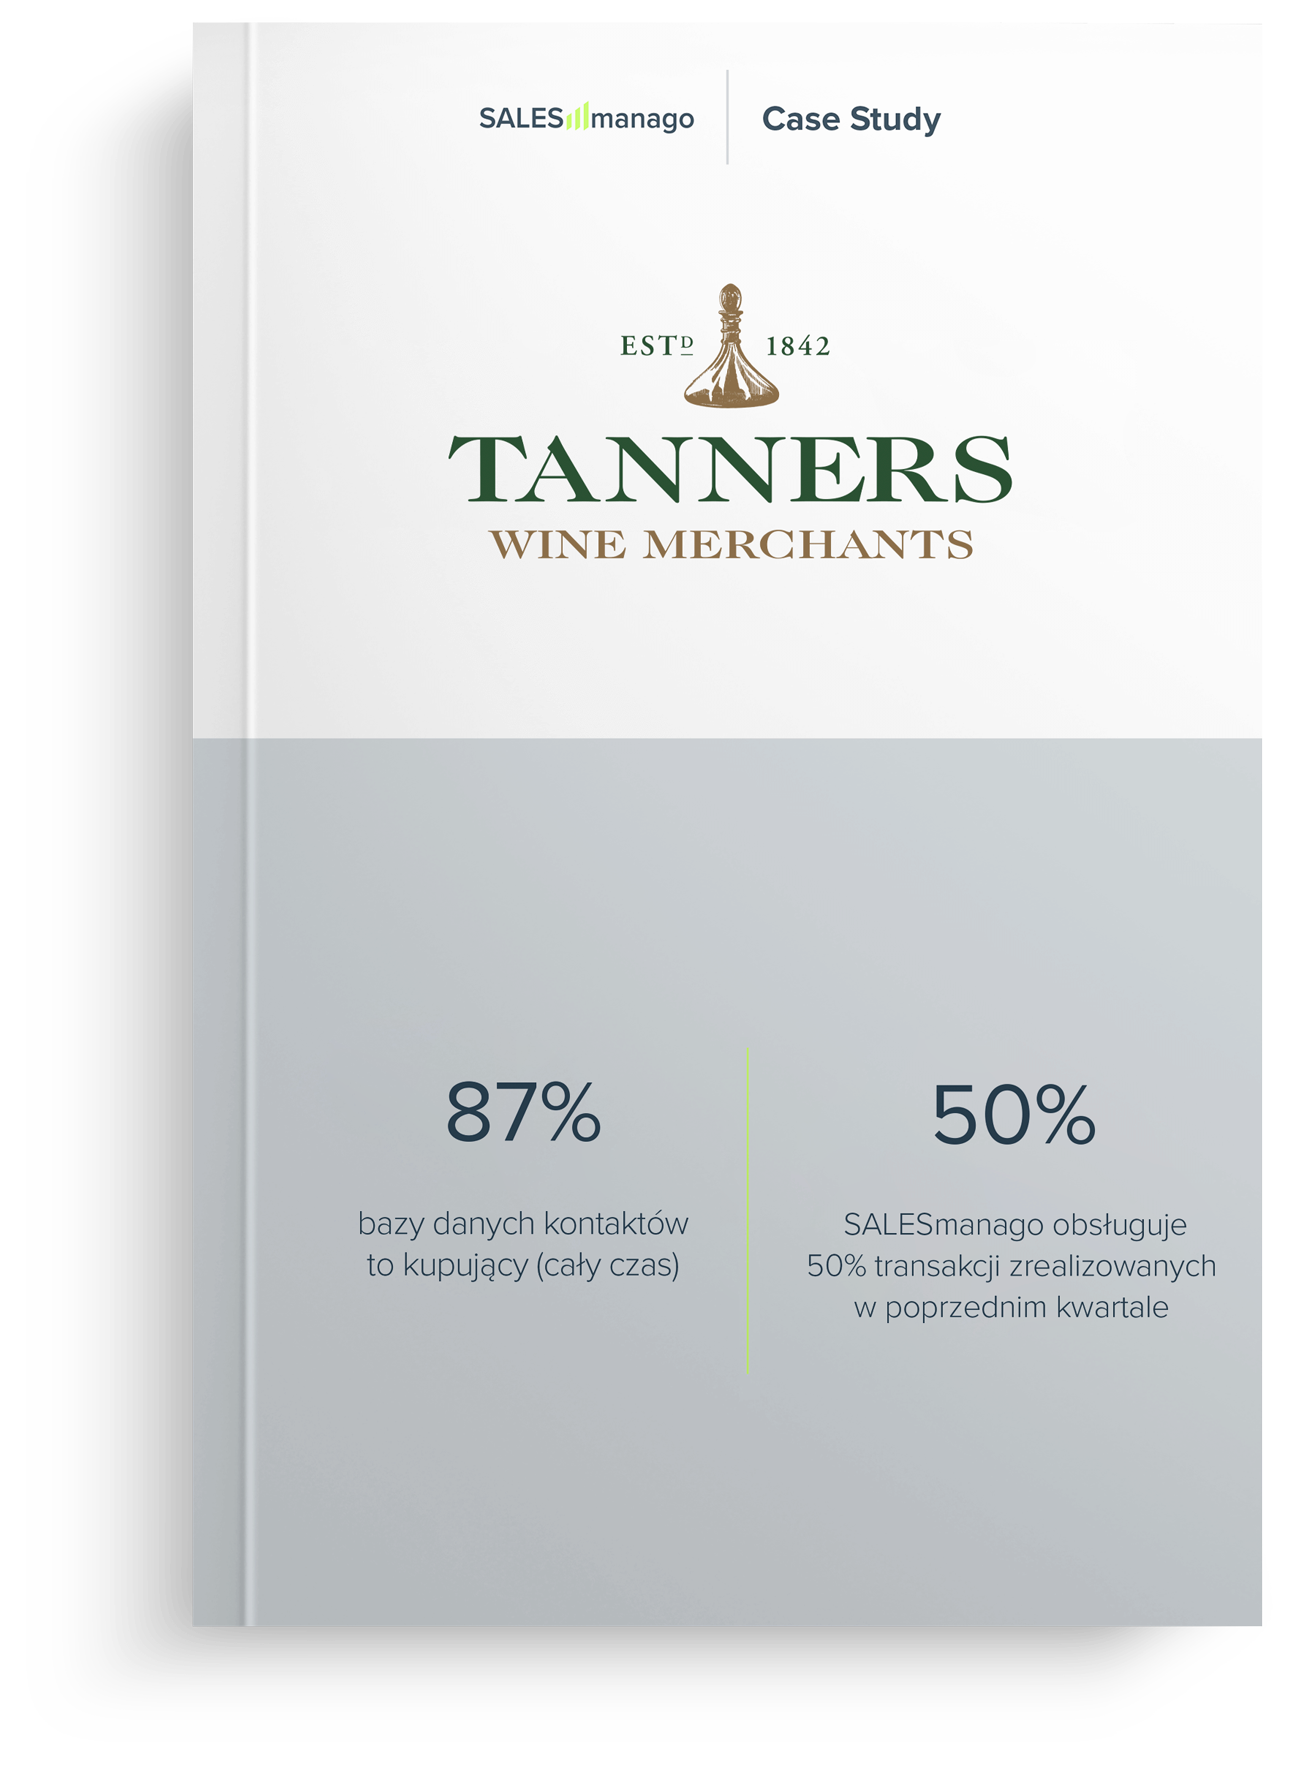 Tanners case study